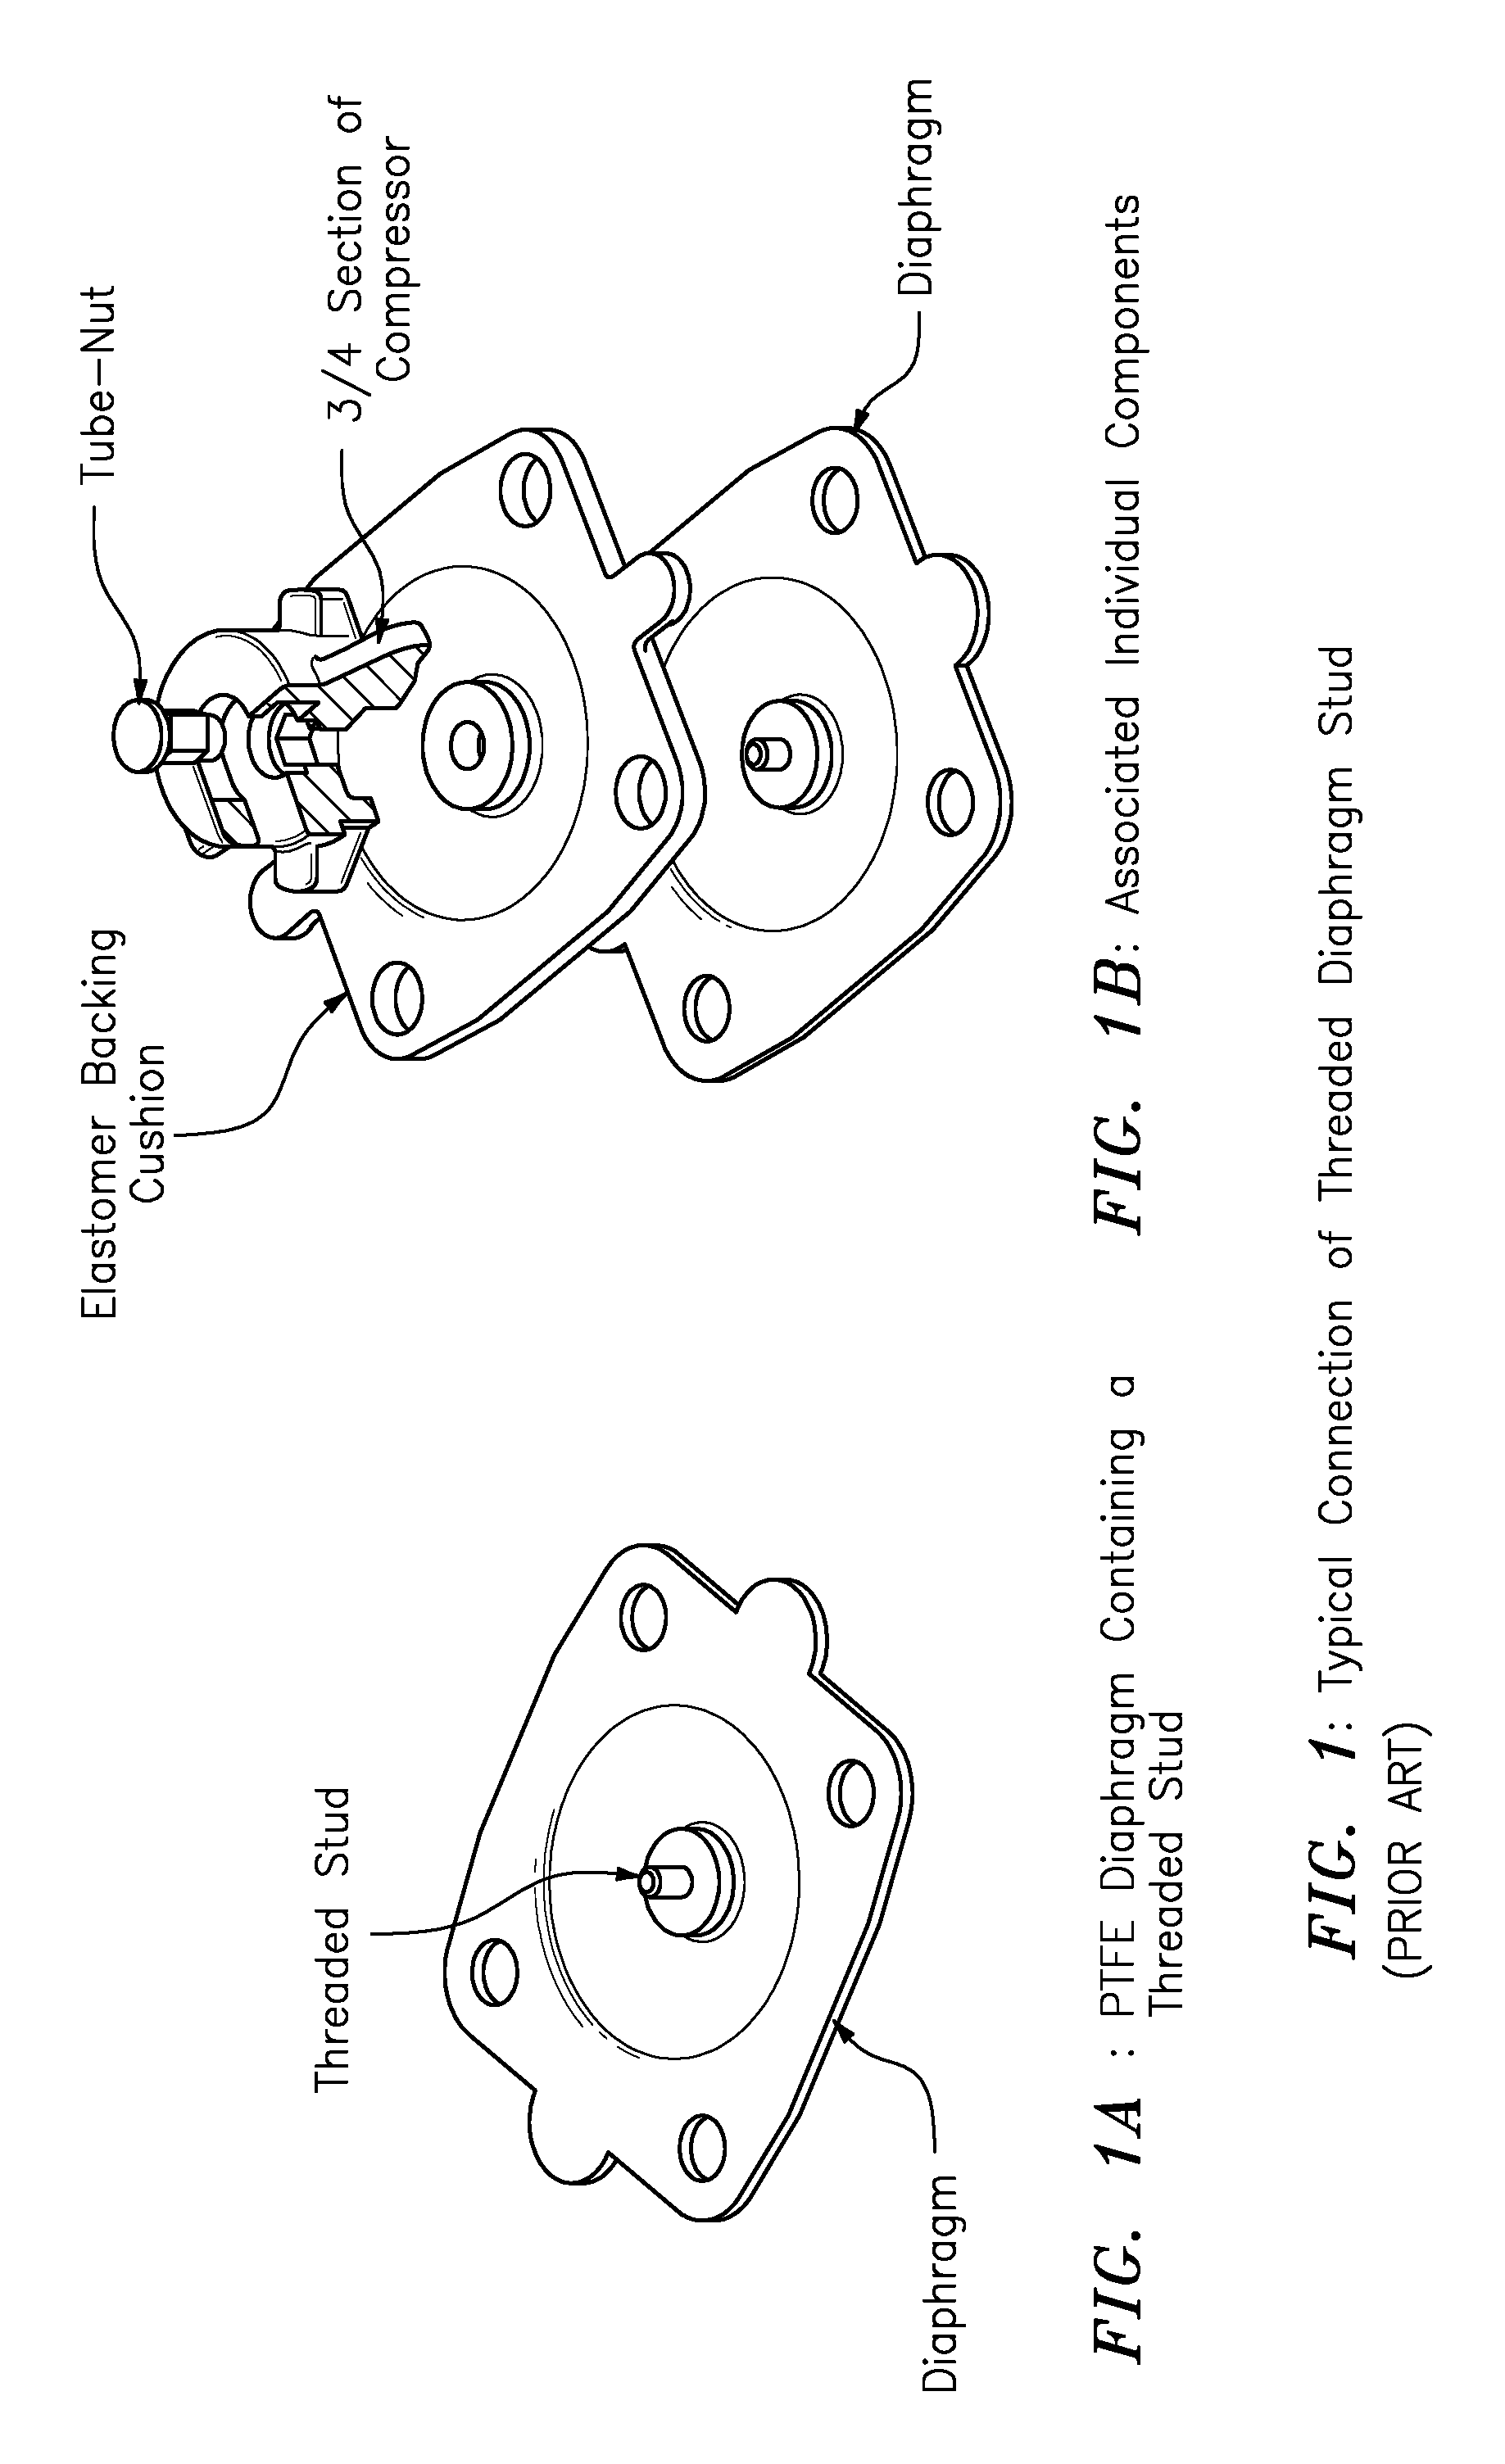 Valve having at least one hourglass studs for coupling to diaphragm and compressor/spindle components